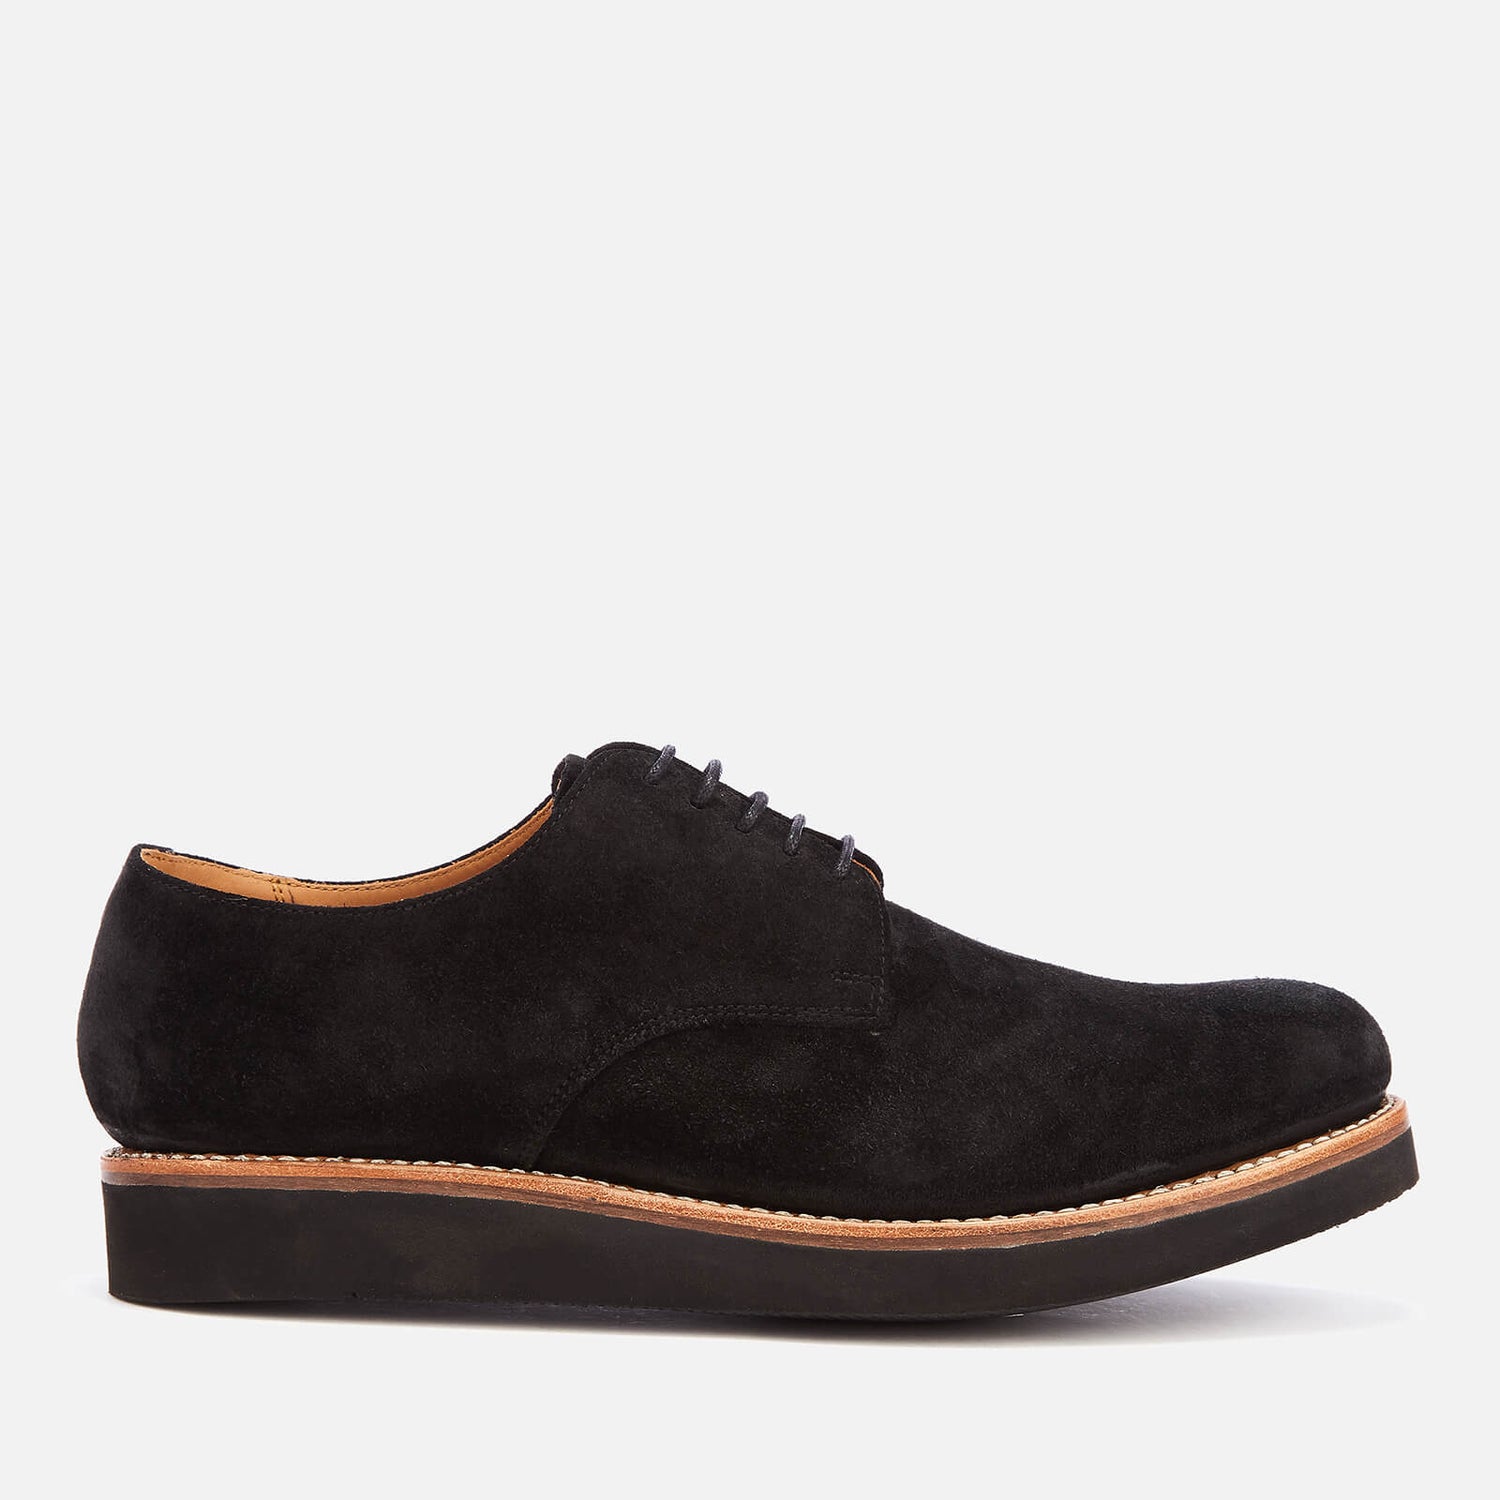 Grenson Men's Curt Suede Derby Shoes - Black - Free UK Delivery Available